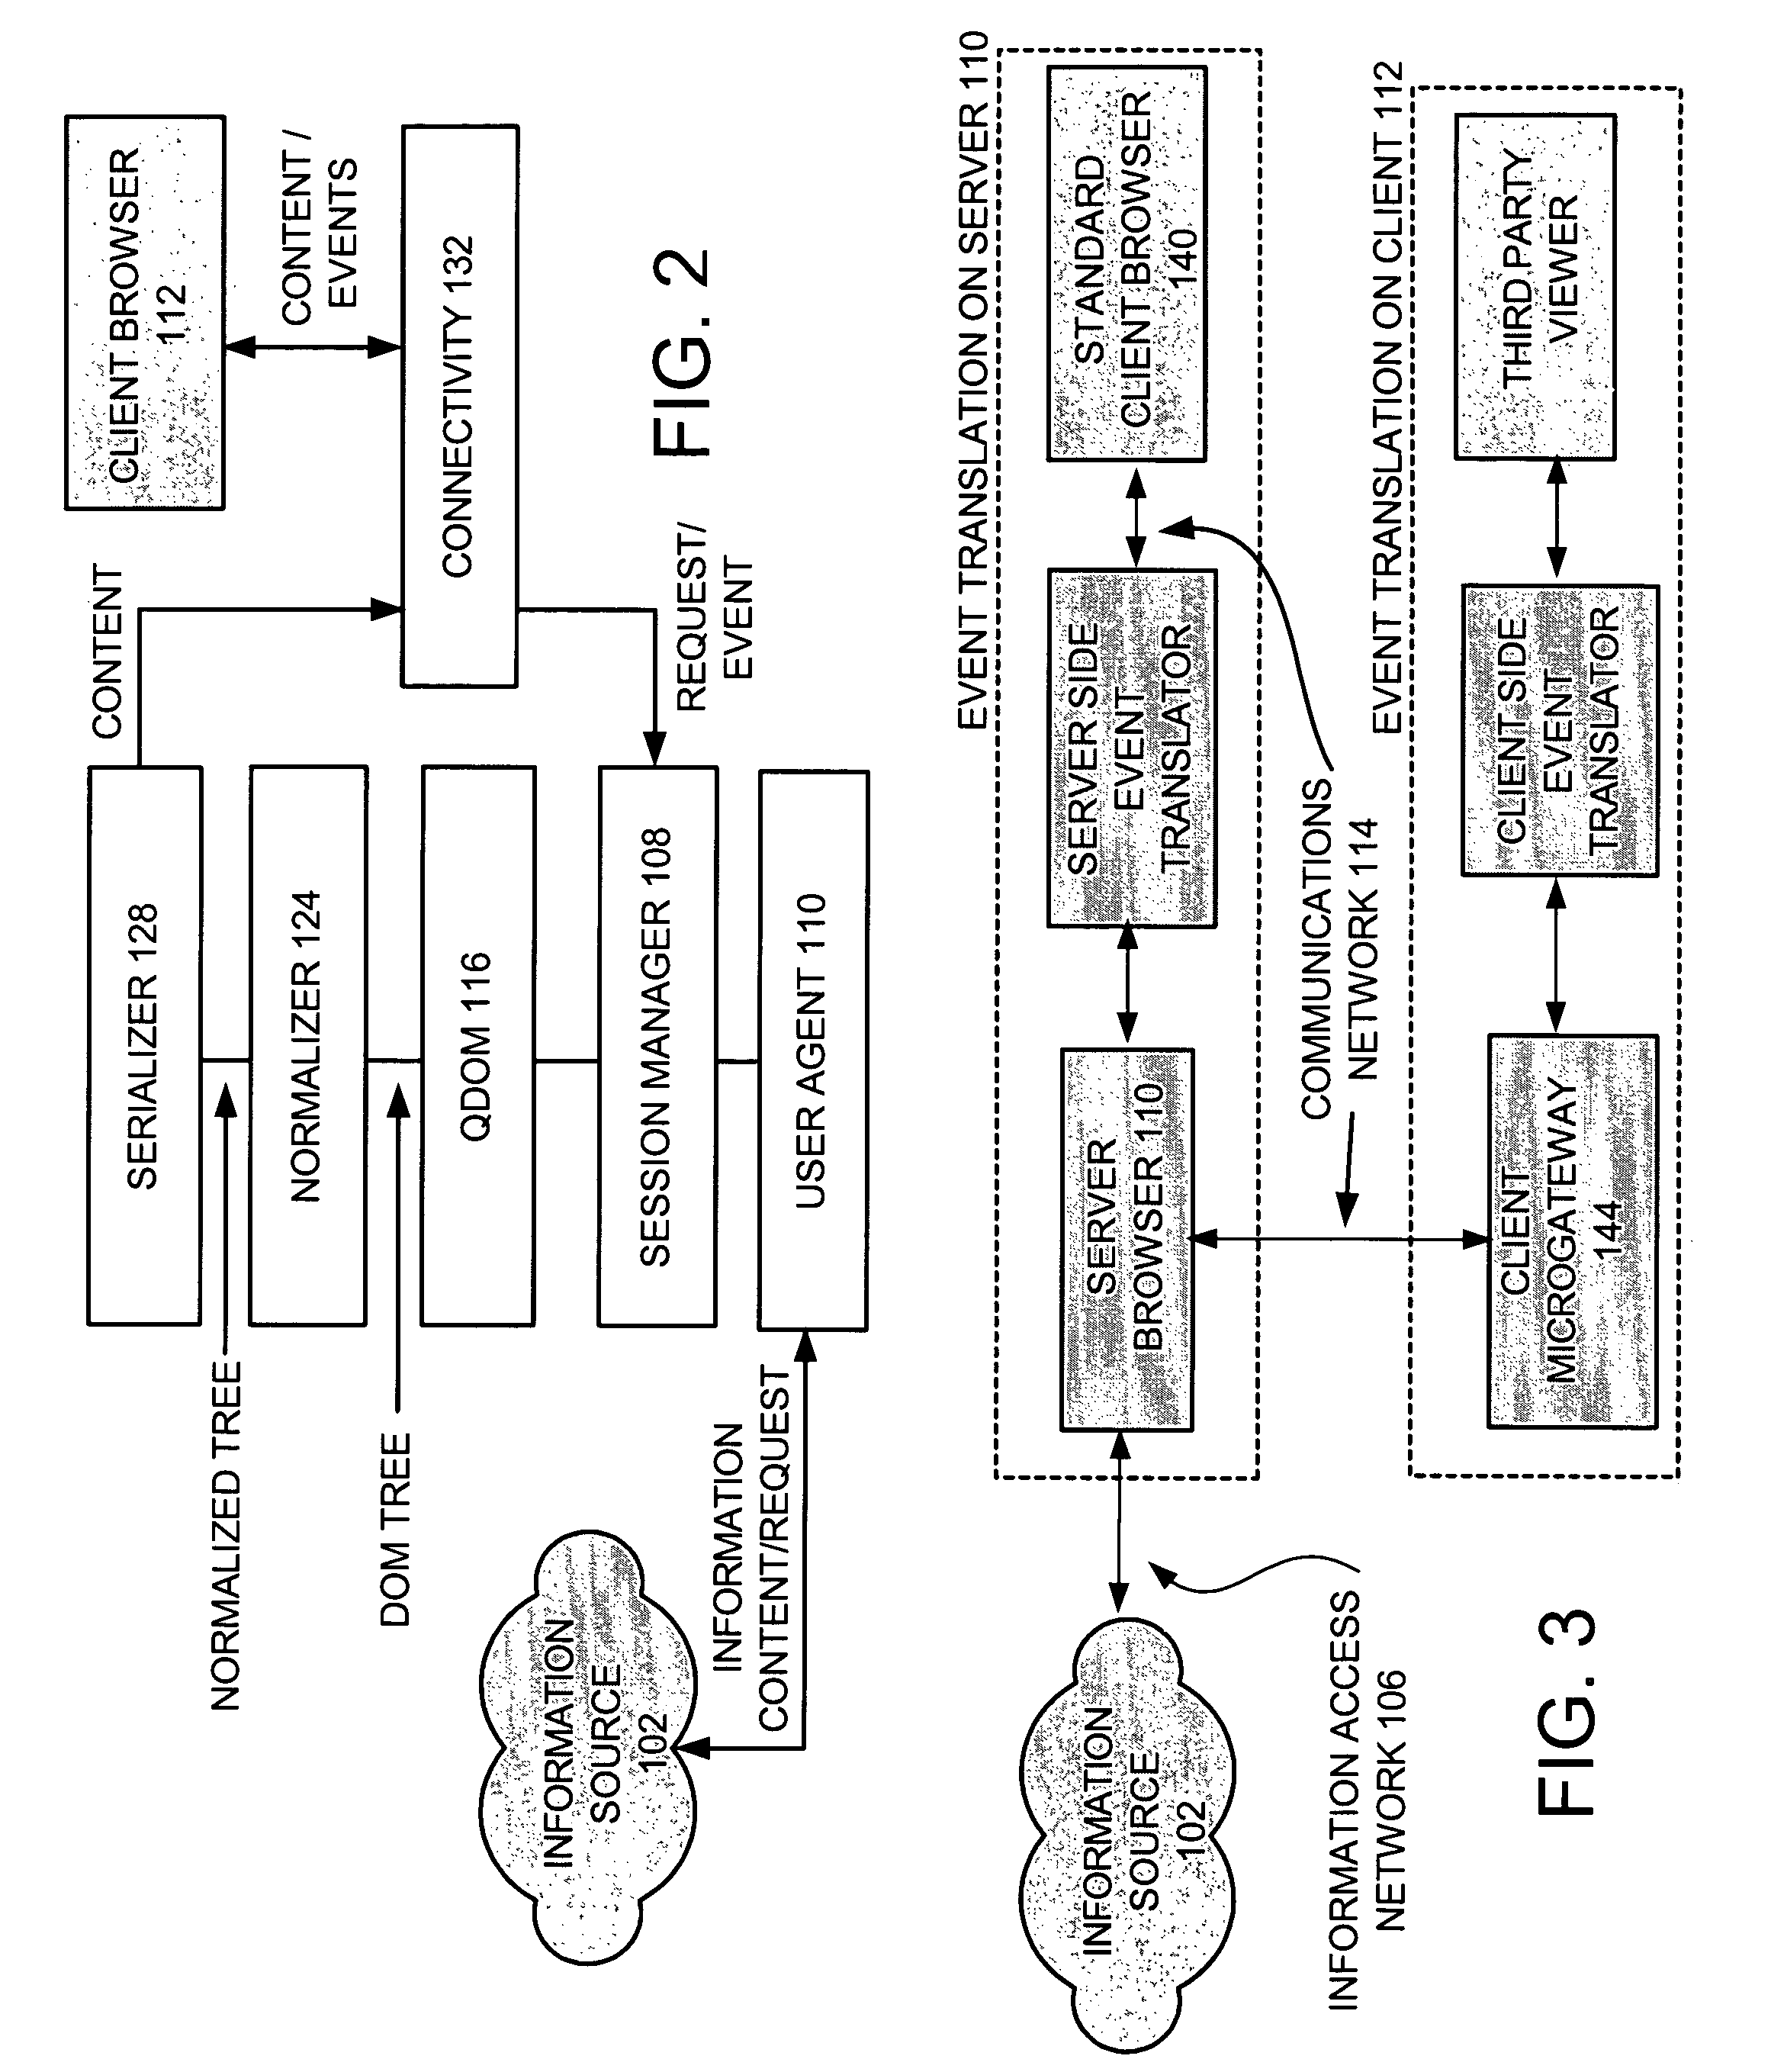 System and method for providing and displaying information content